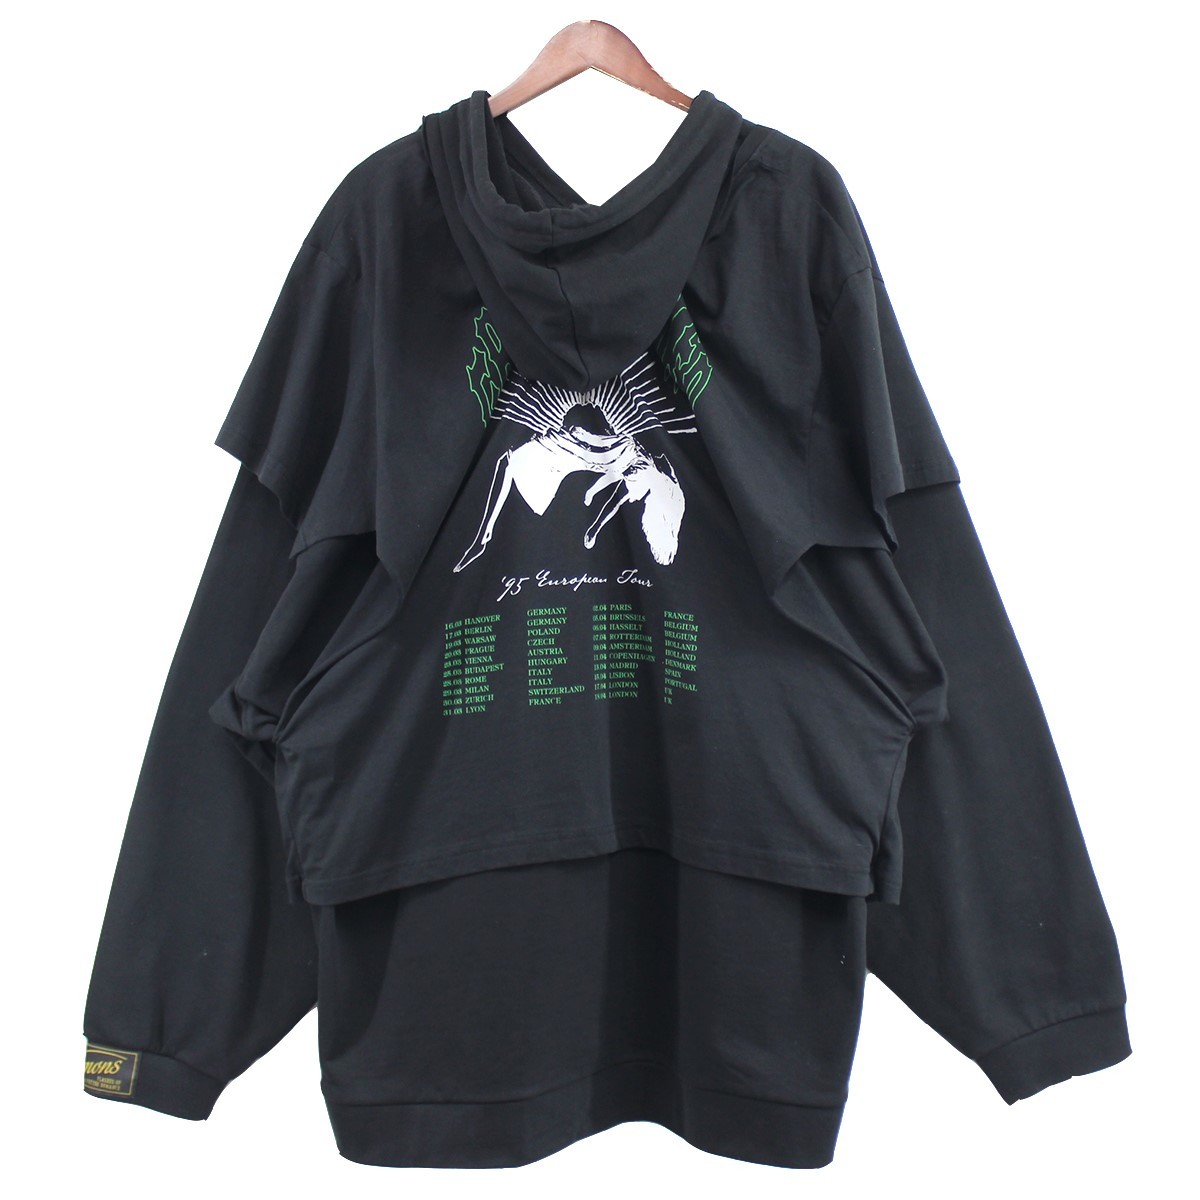 RAF SIMONS　 22SS Hoodie doubled with printed T-shirt ドッキングパーカー 商品番号：8056000147490